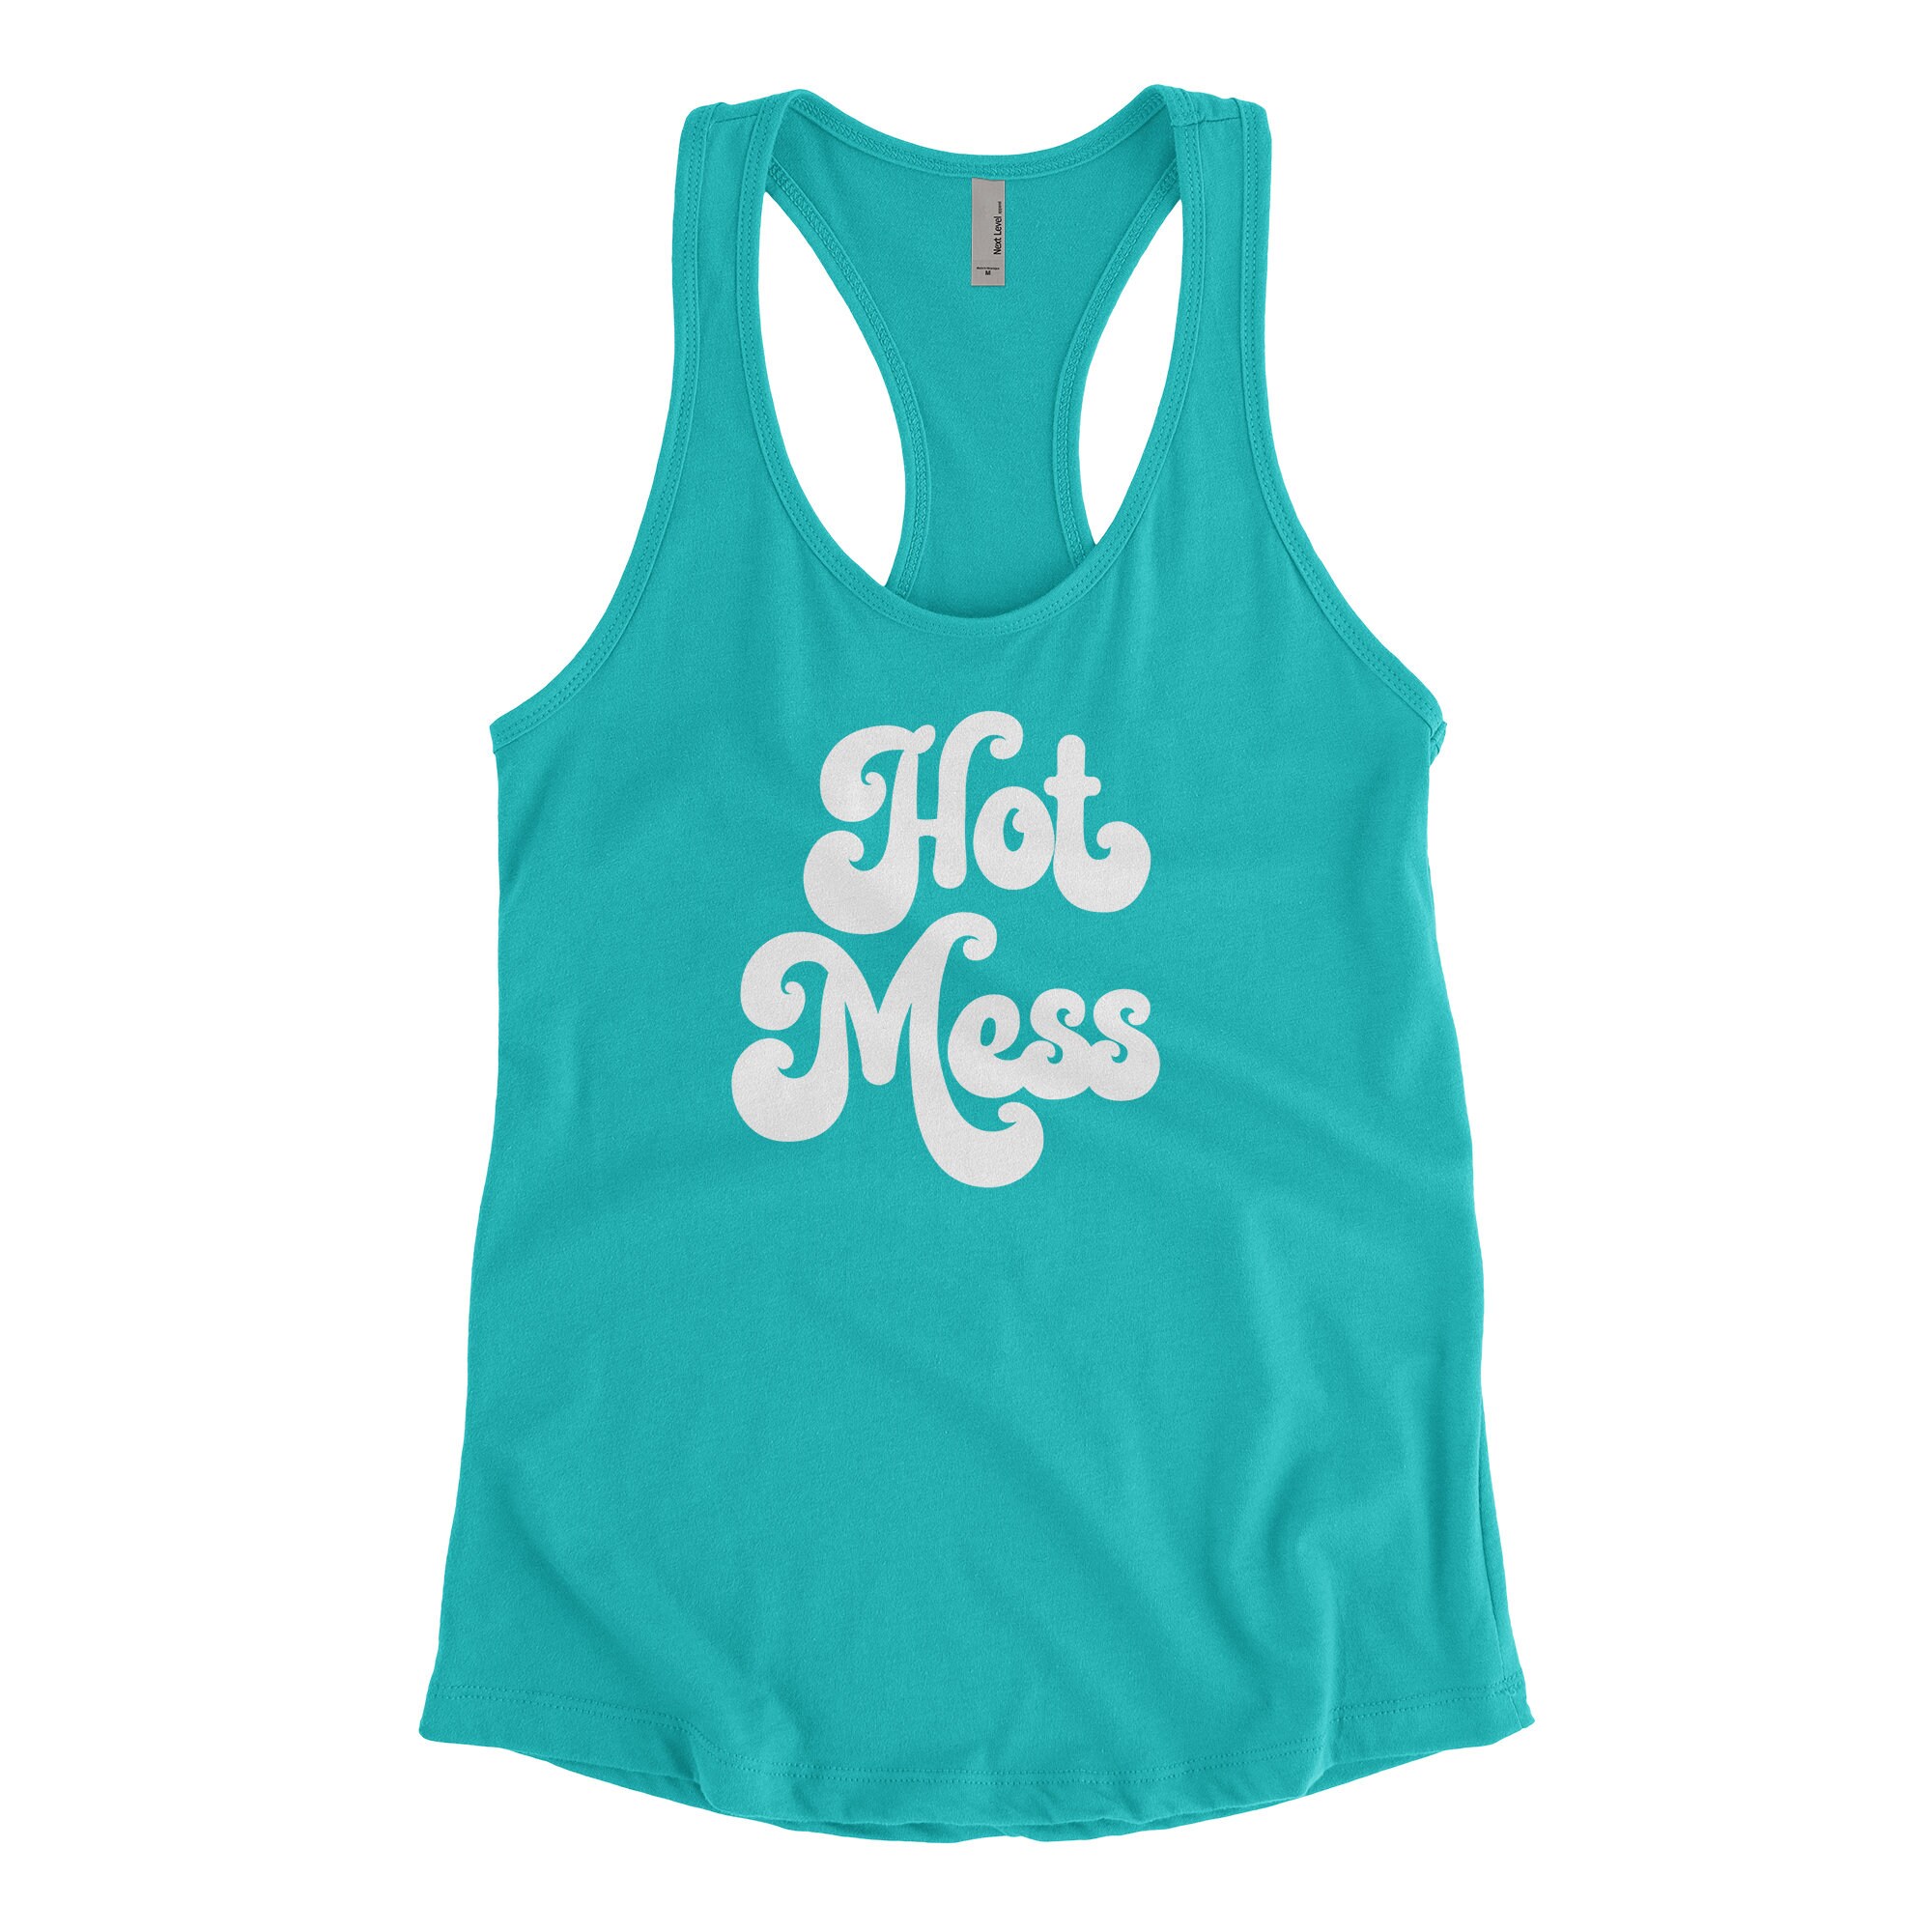 Hot Mess Tank Top / Gift for Women Racerback Cute Workout - Etsy